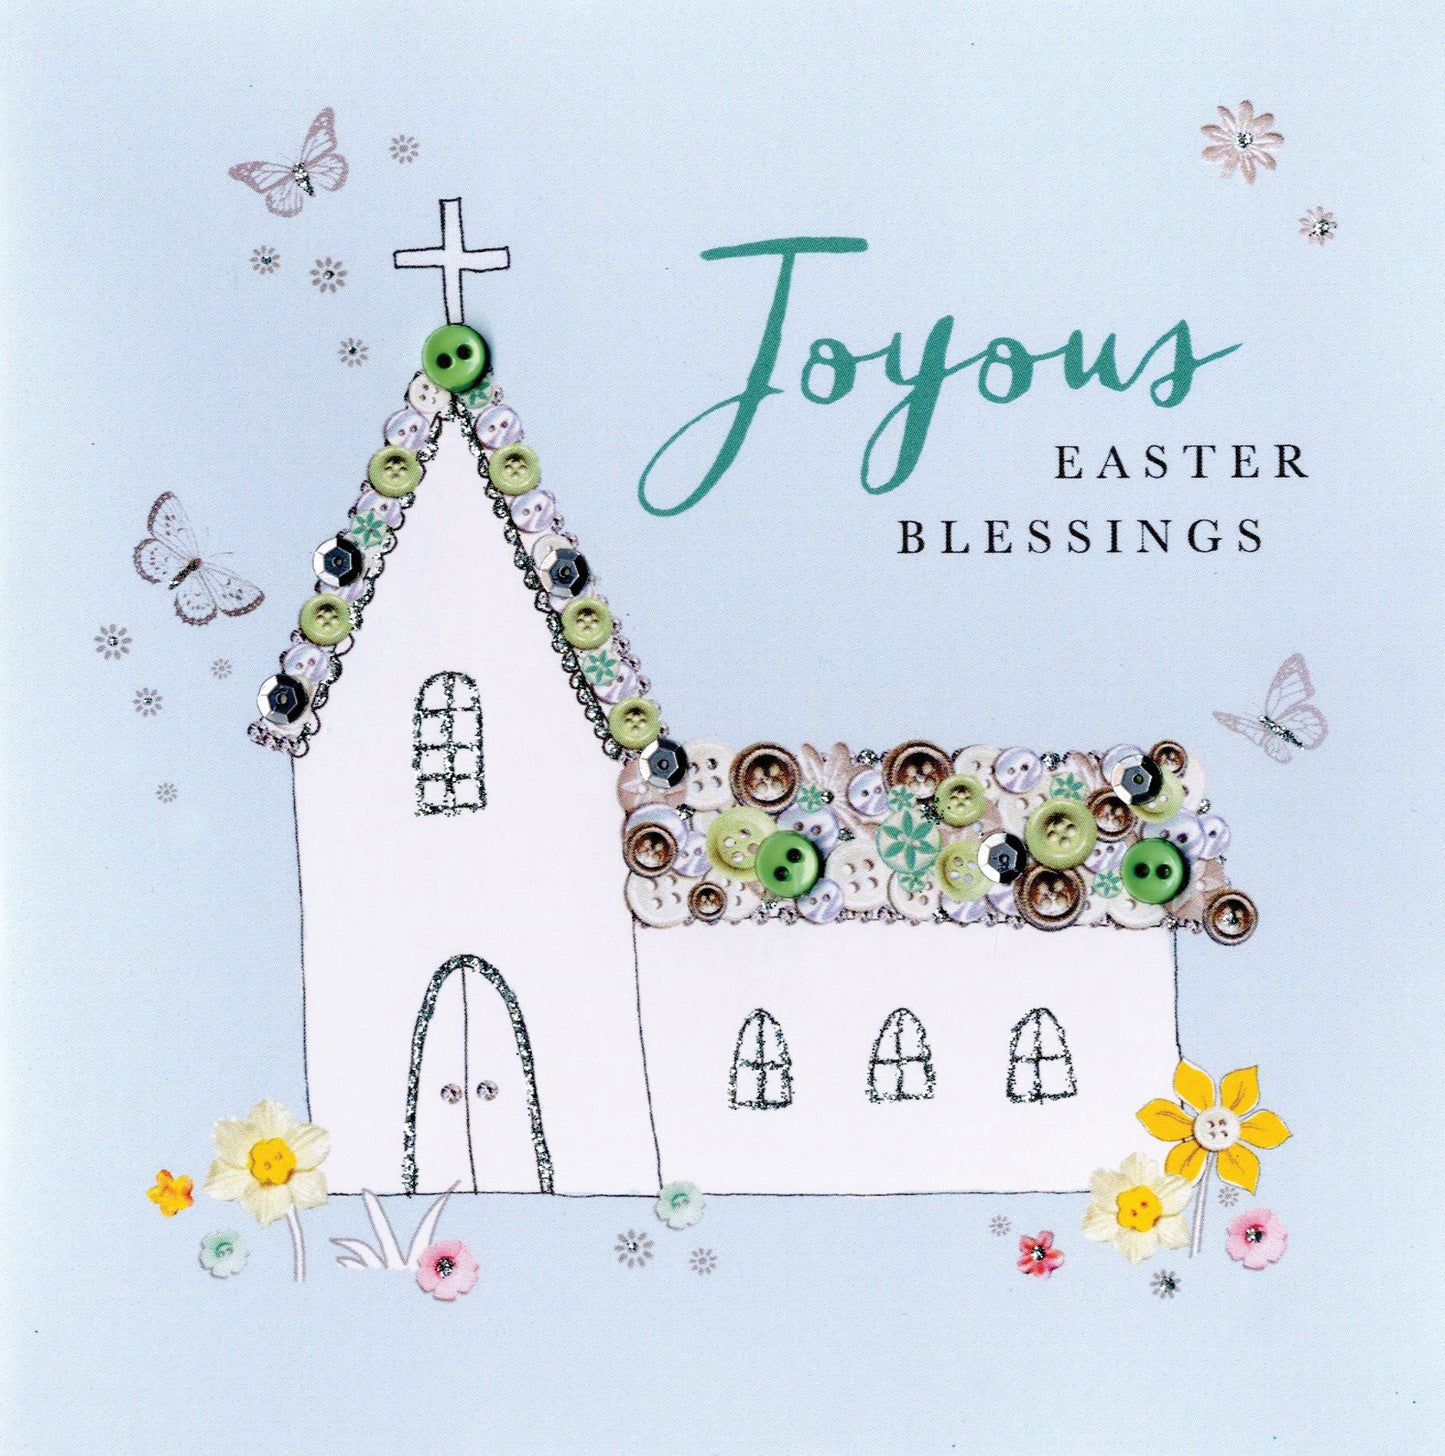 Joyous Easter Blessings Greeting Card Buttoned Up